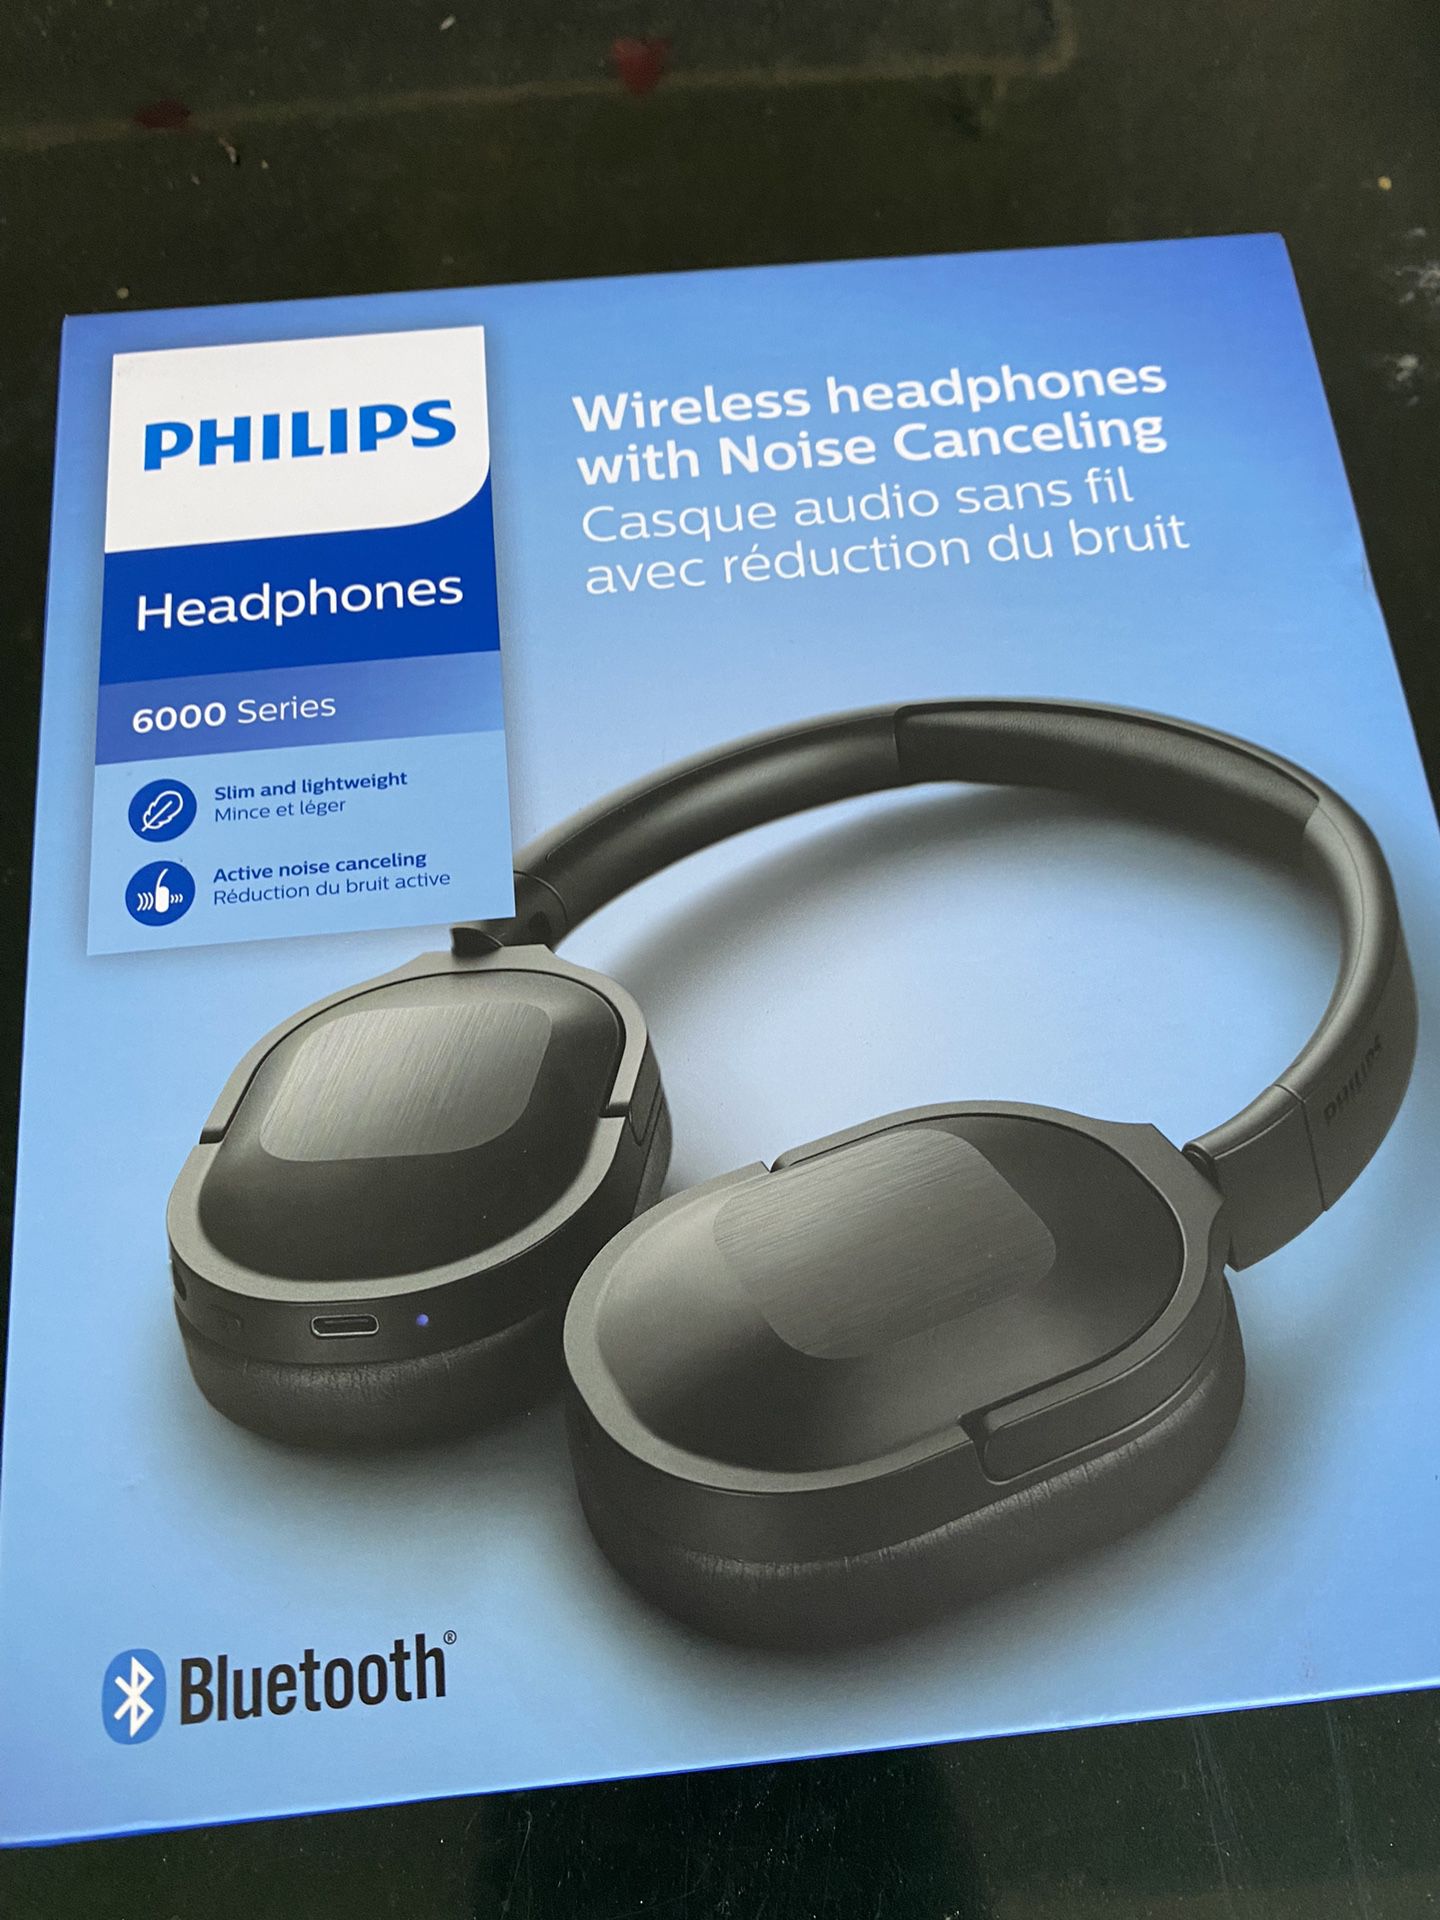 Philips - Wireless headphones with Noise Canceling 